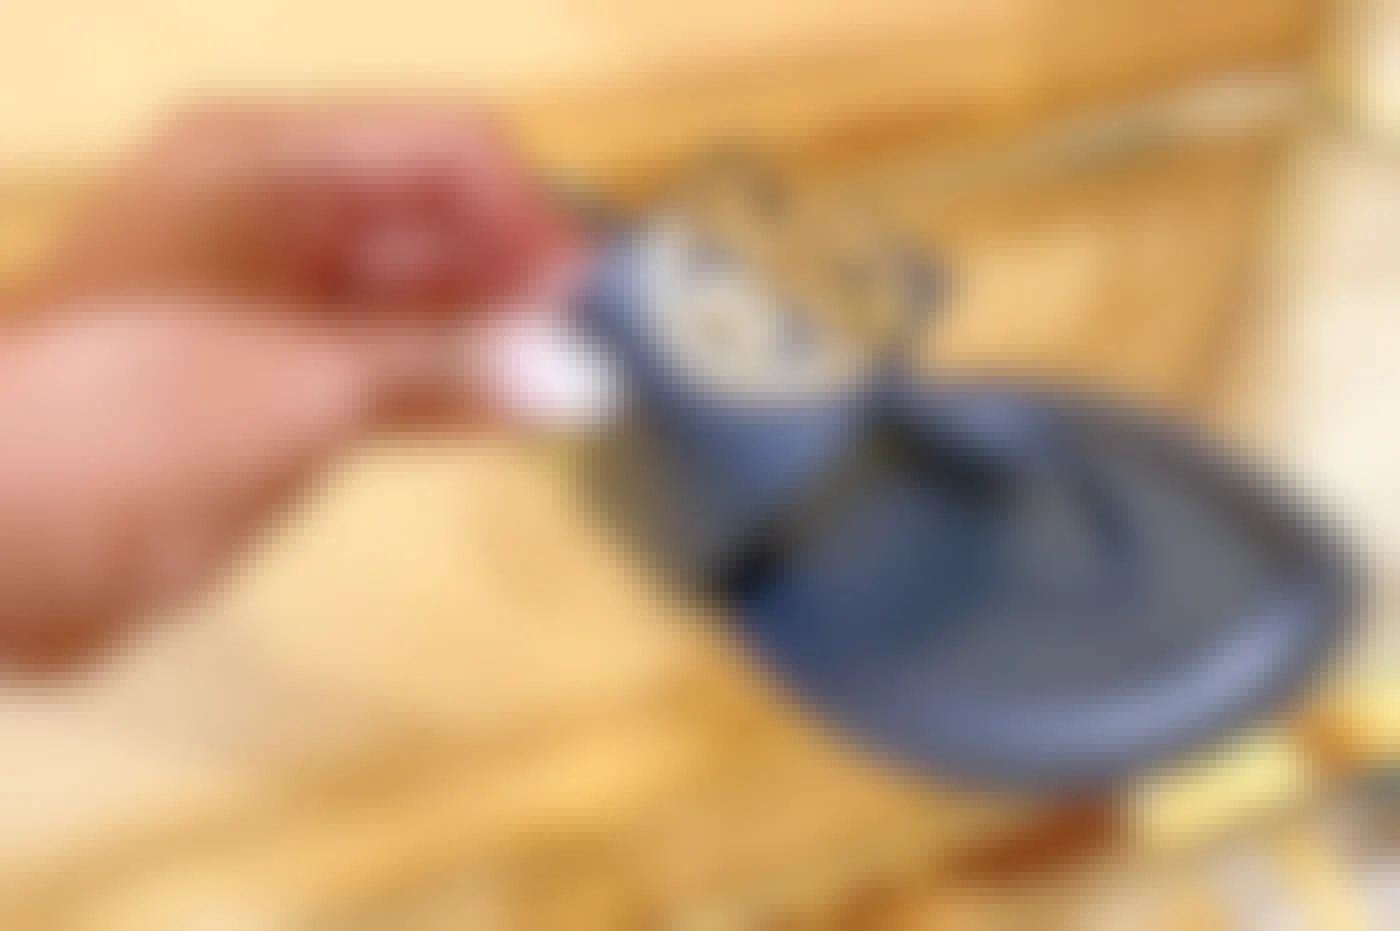 A person touching the strap on a pair of Tory Burch sandals.